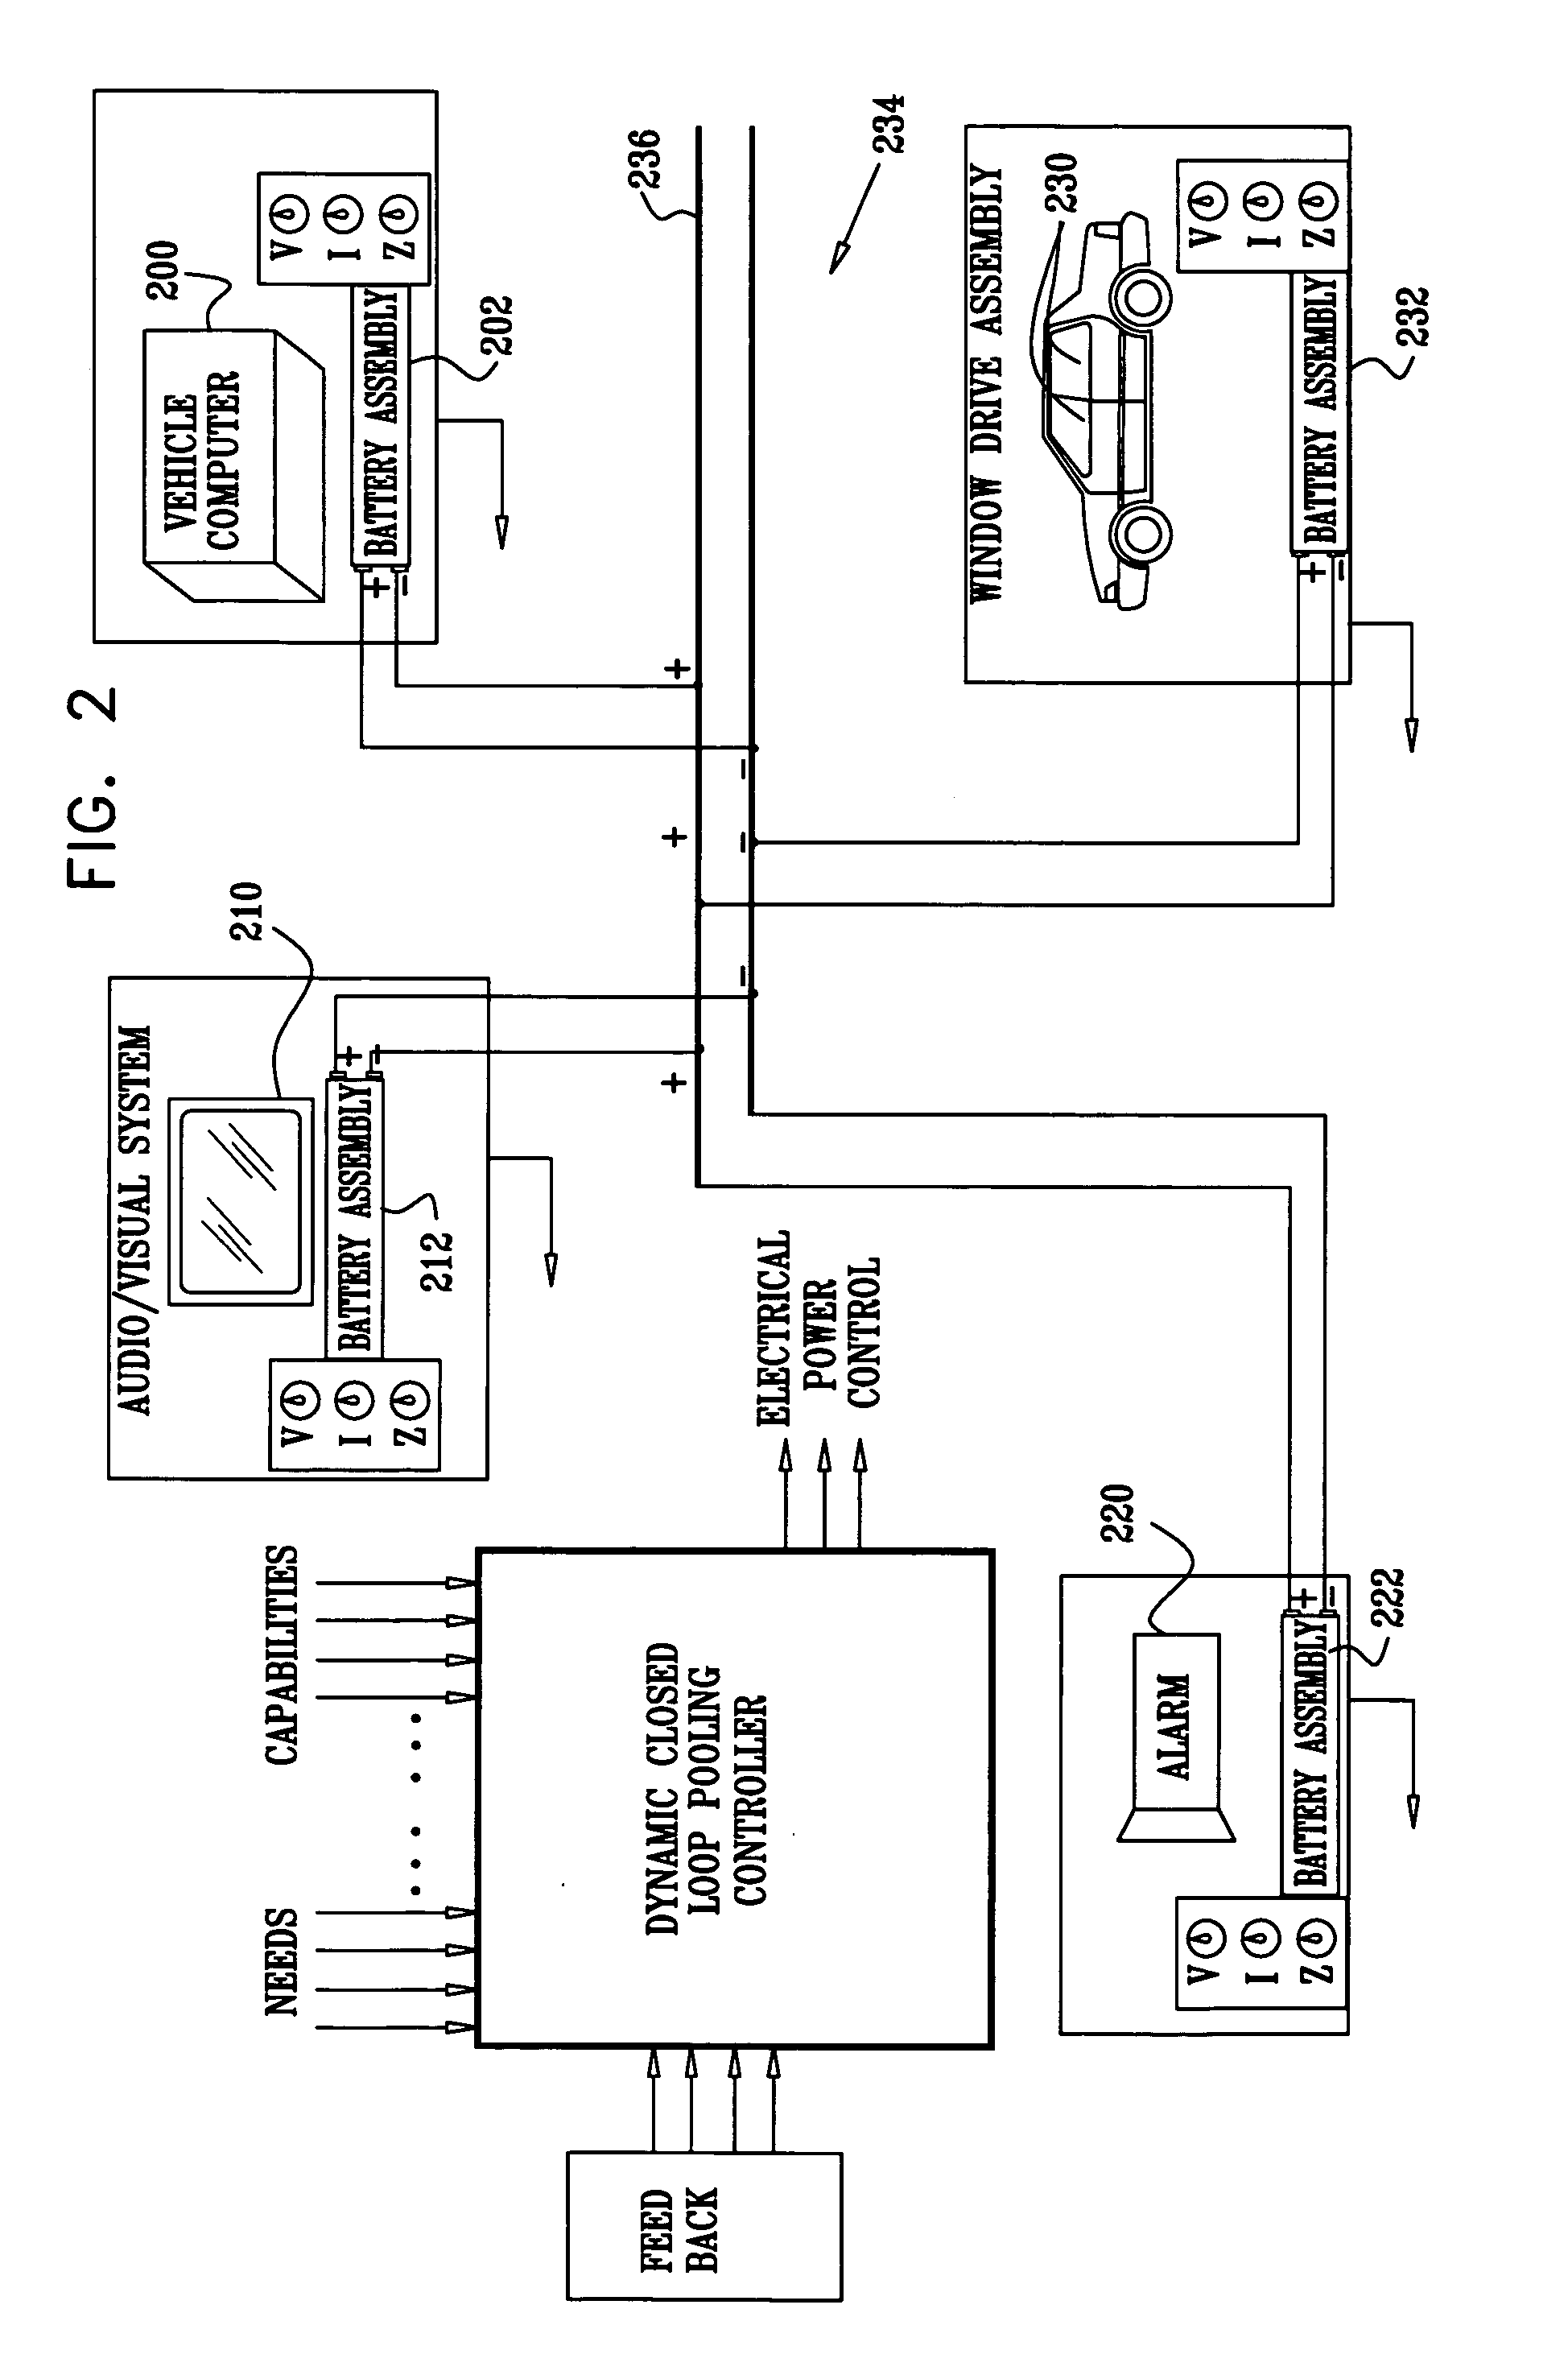 Direct current power pooling